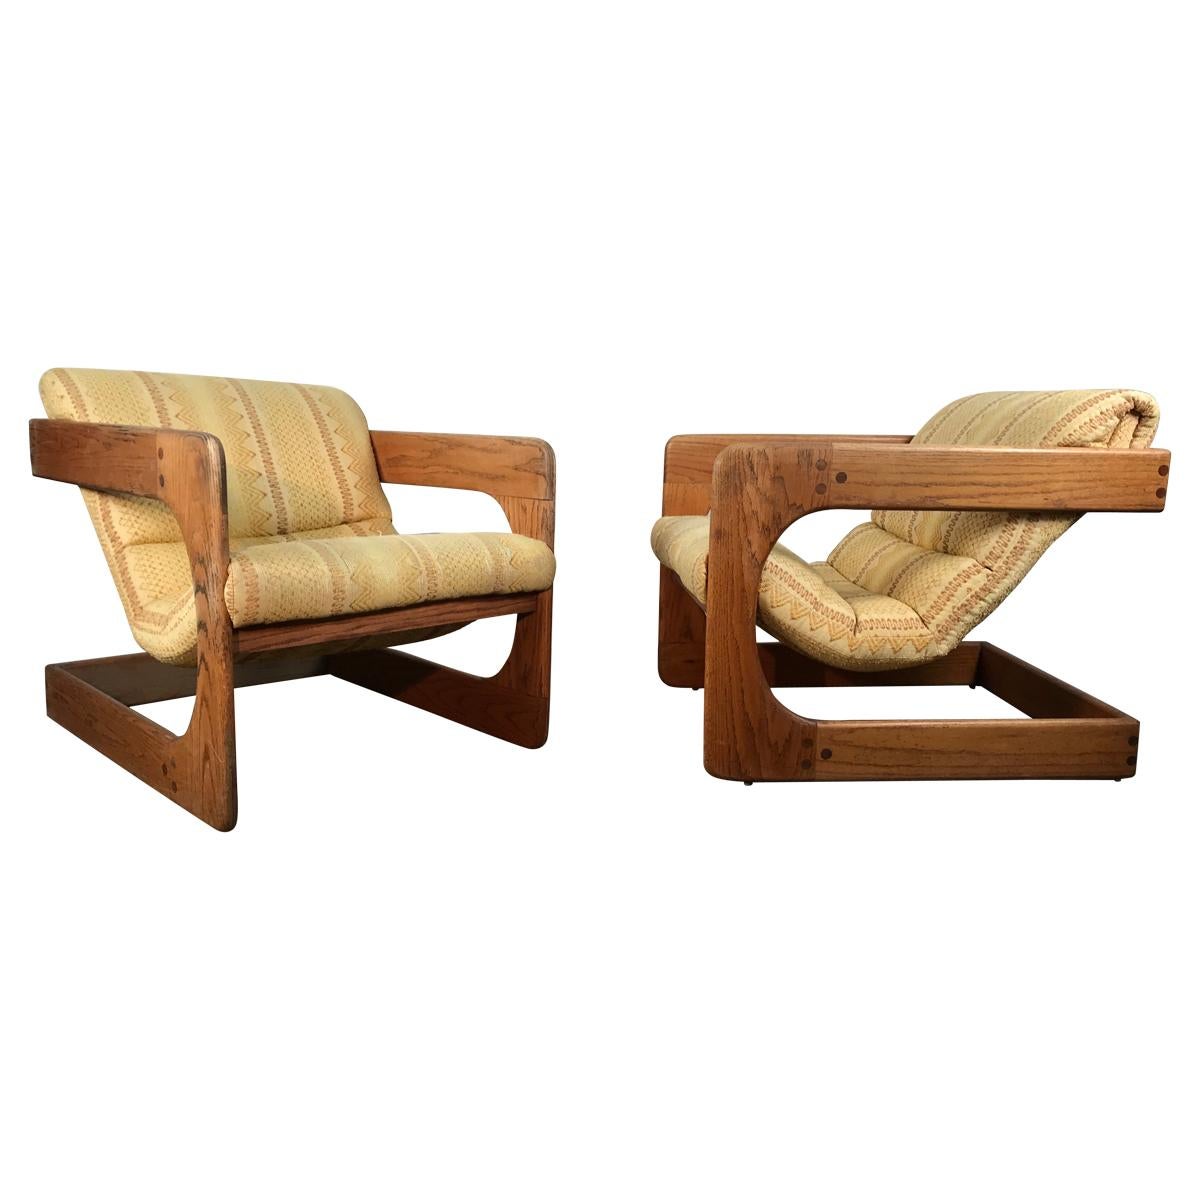 Classic 1970s Cantilvered Lounge Chairs by Lou Hodges, California Design Group